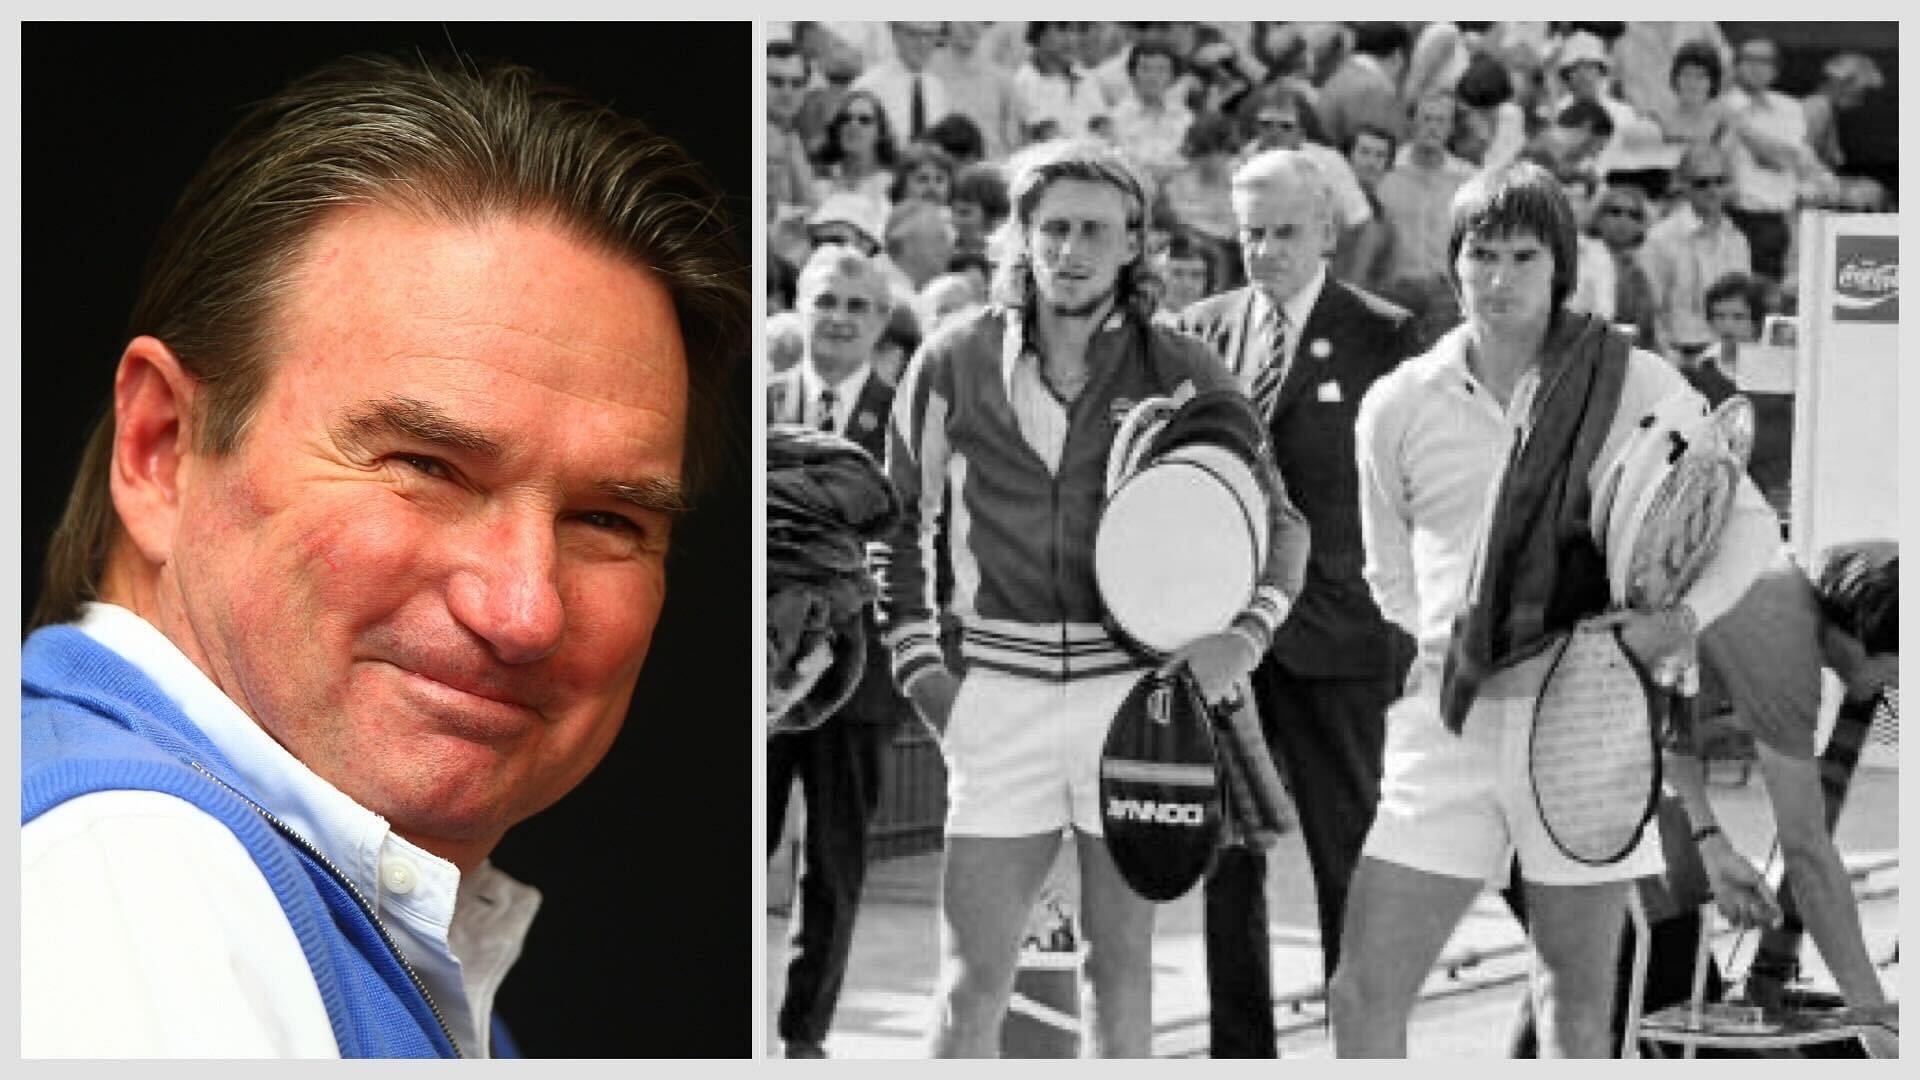 Jimmy Connors lost to Bjorn Borg in the 1977 Wimbledon final.